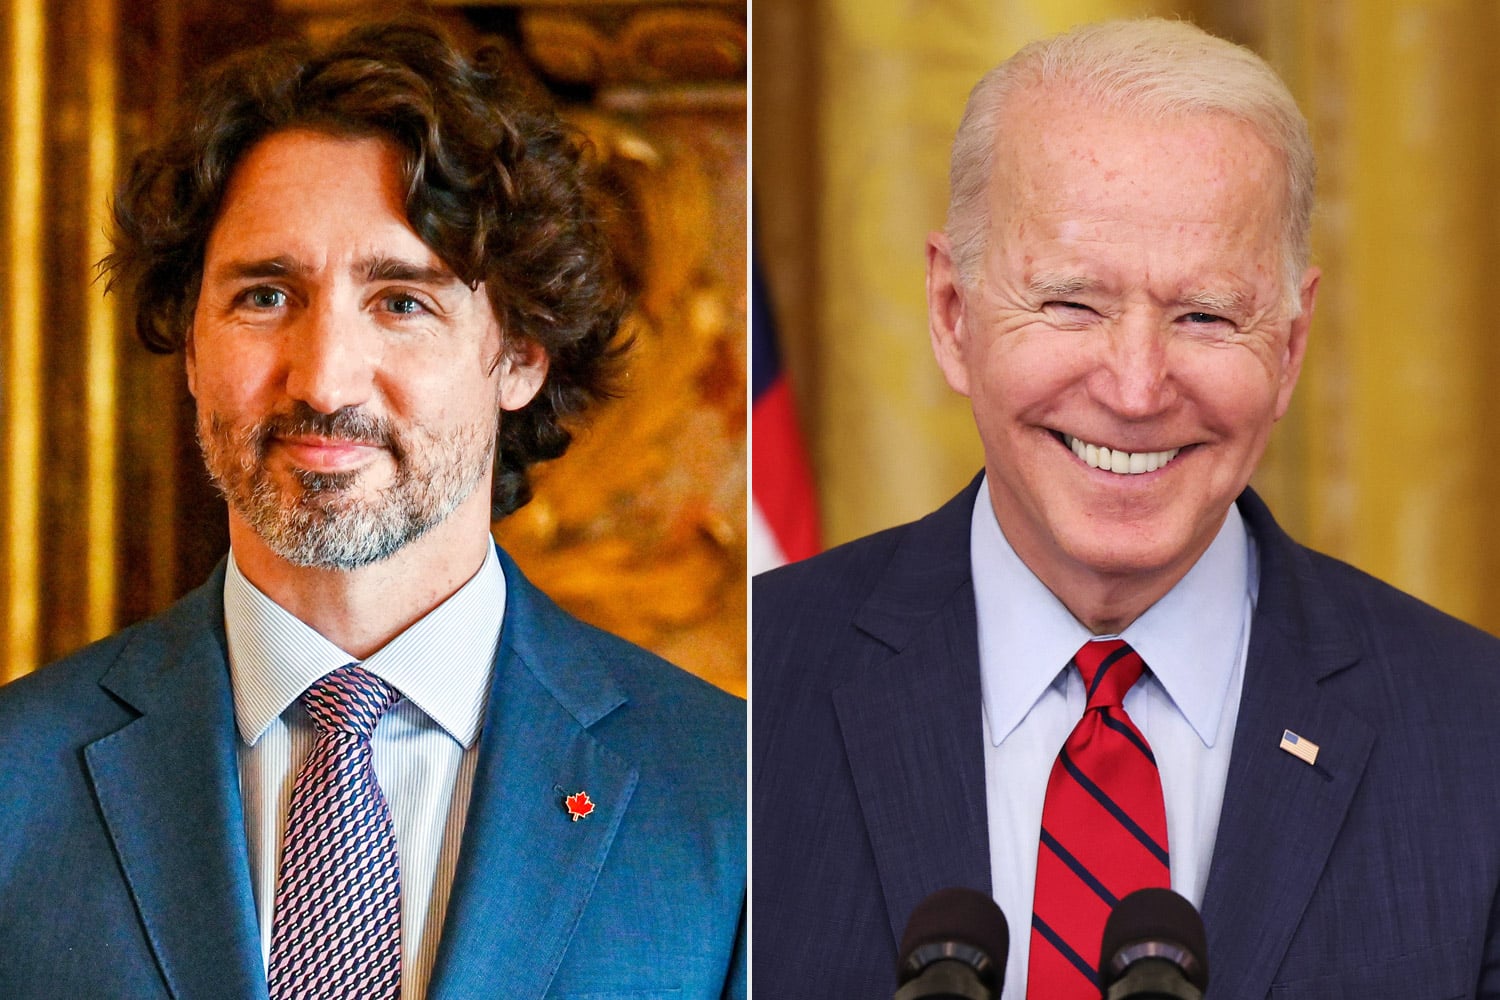 Russia imposes sanctions on Joe Biden, Justin Trudeau, others